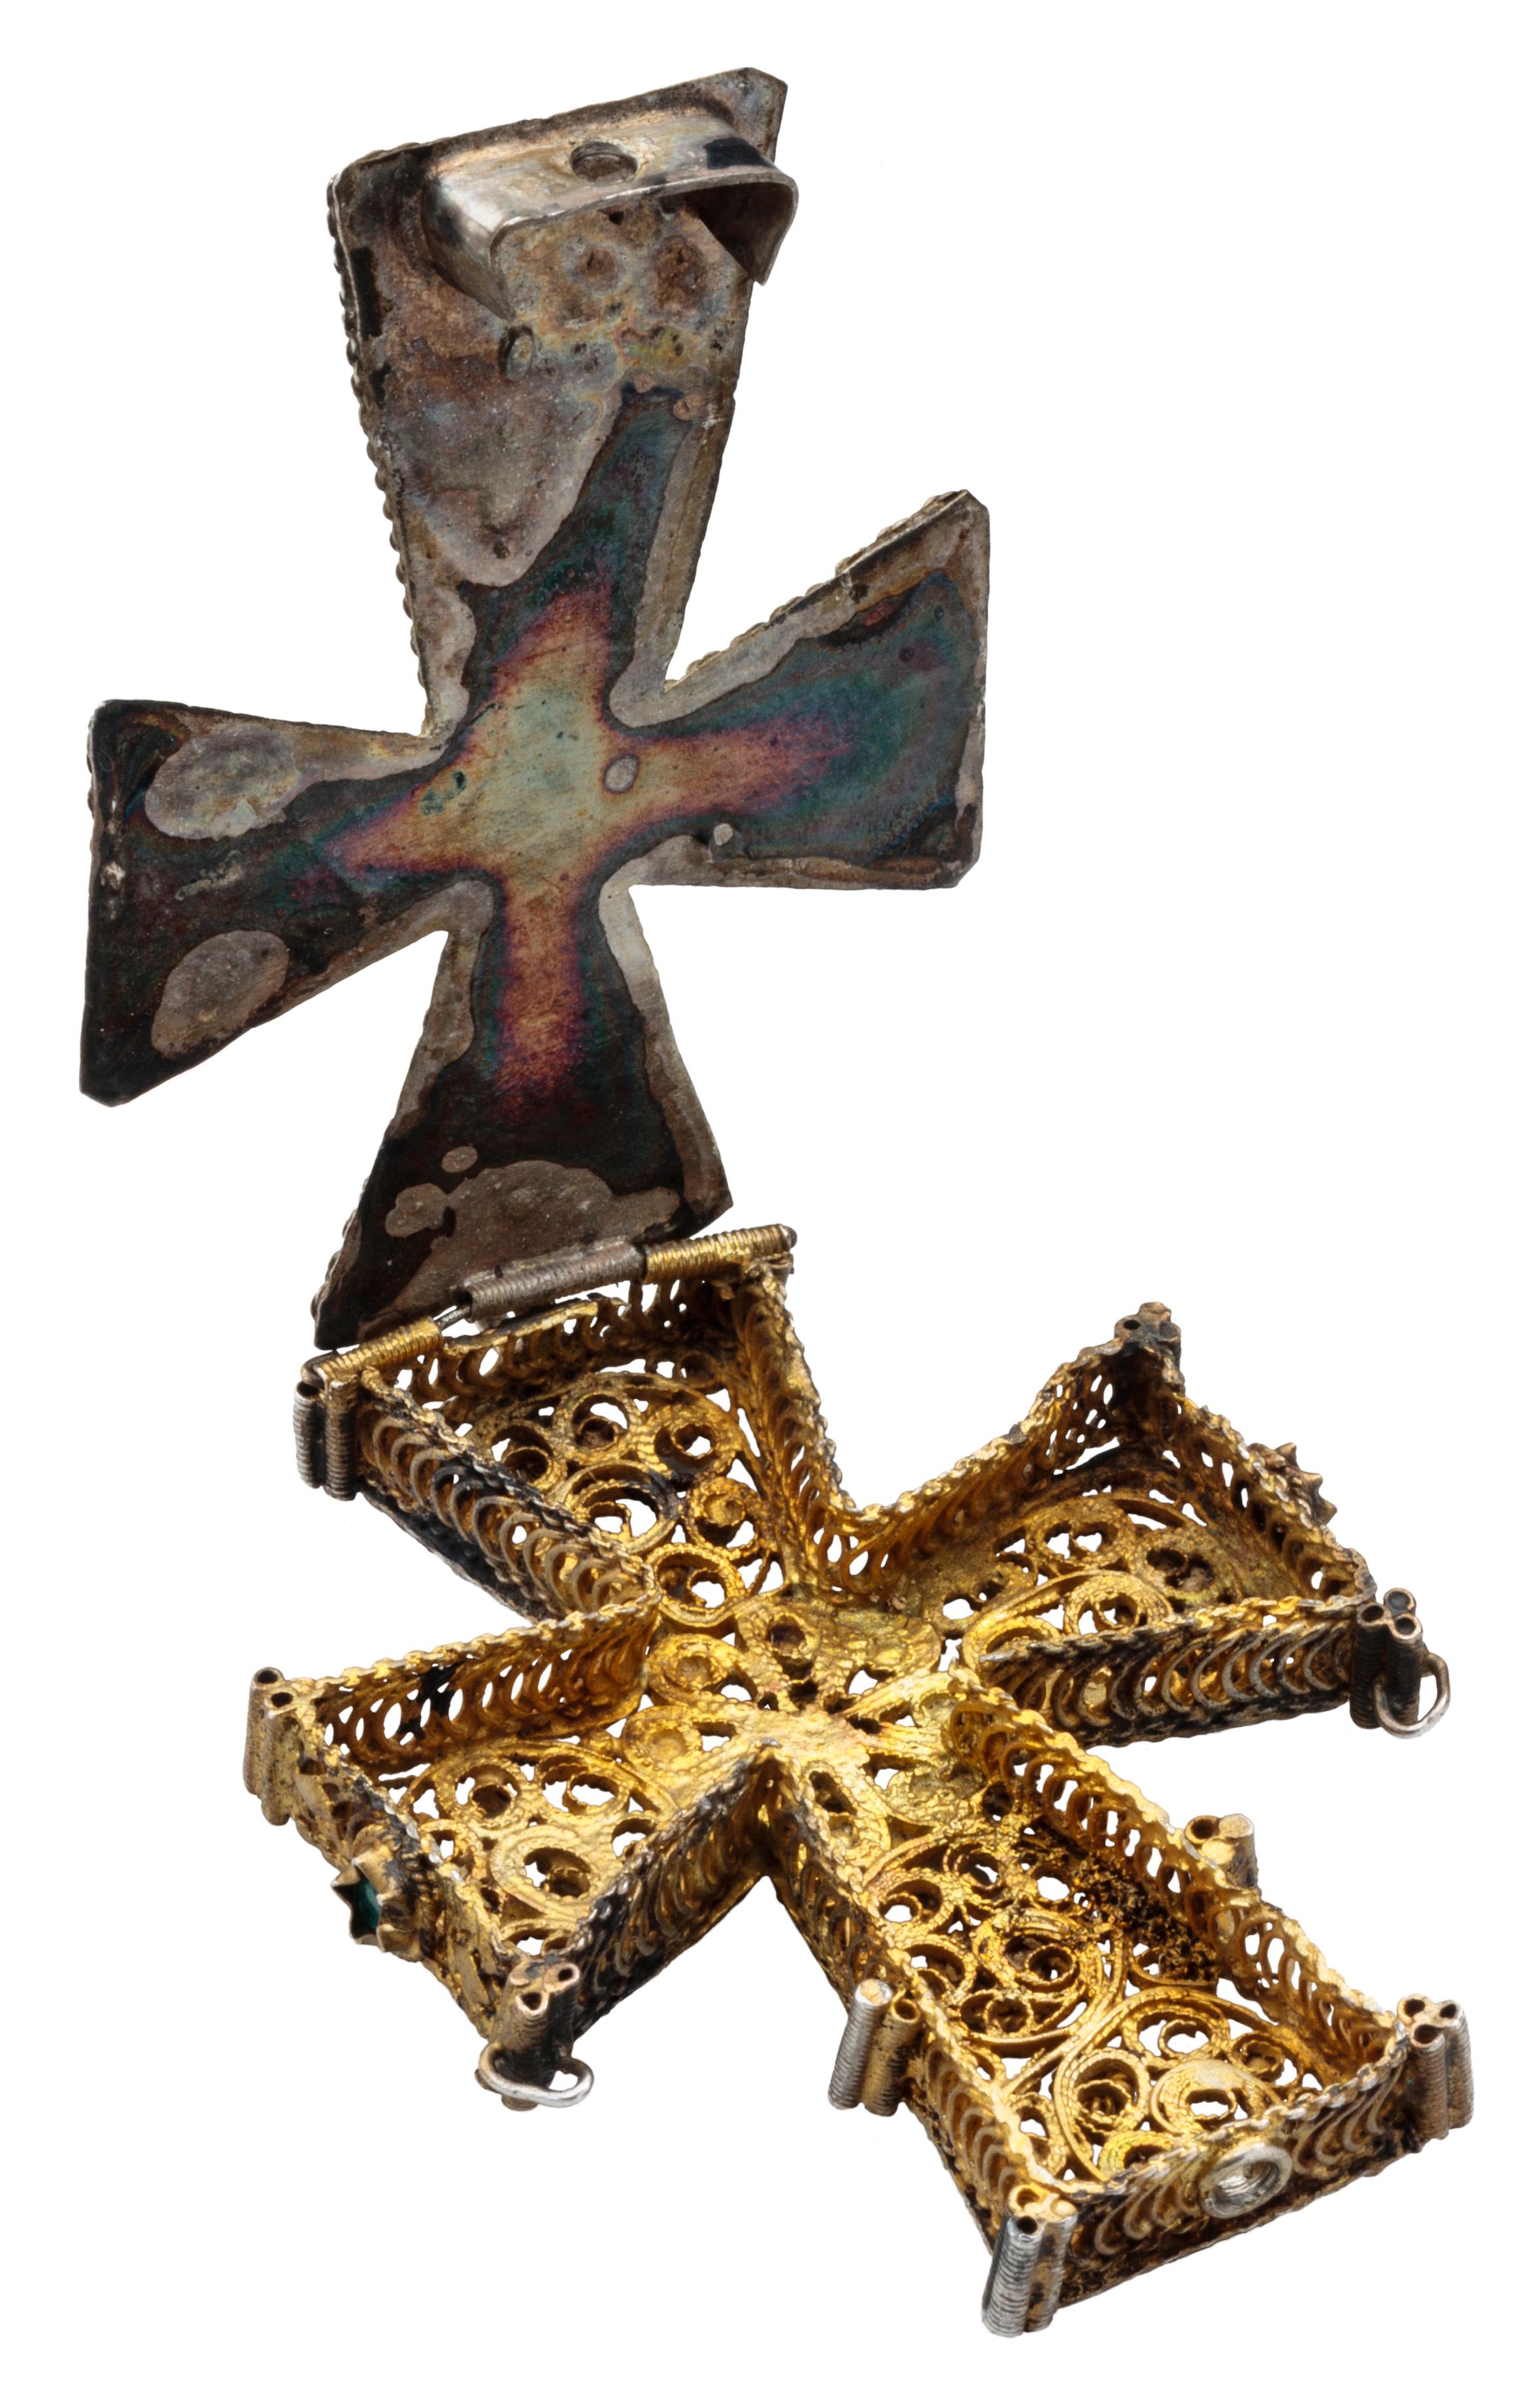 RELIQUARY CROSS PENDANT 
Balkans (probably Bulgaria), 18th-19th century 
Gilded silver, glass pastes 
Weight 40.7 grams; dimensions 74 × 15 × 10 mm

Double-sided pendant made of gilded silver filigree in the shape of a Greek cross, with pendant